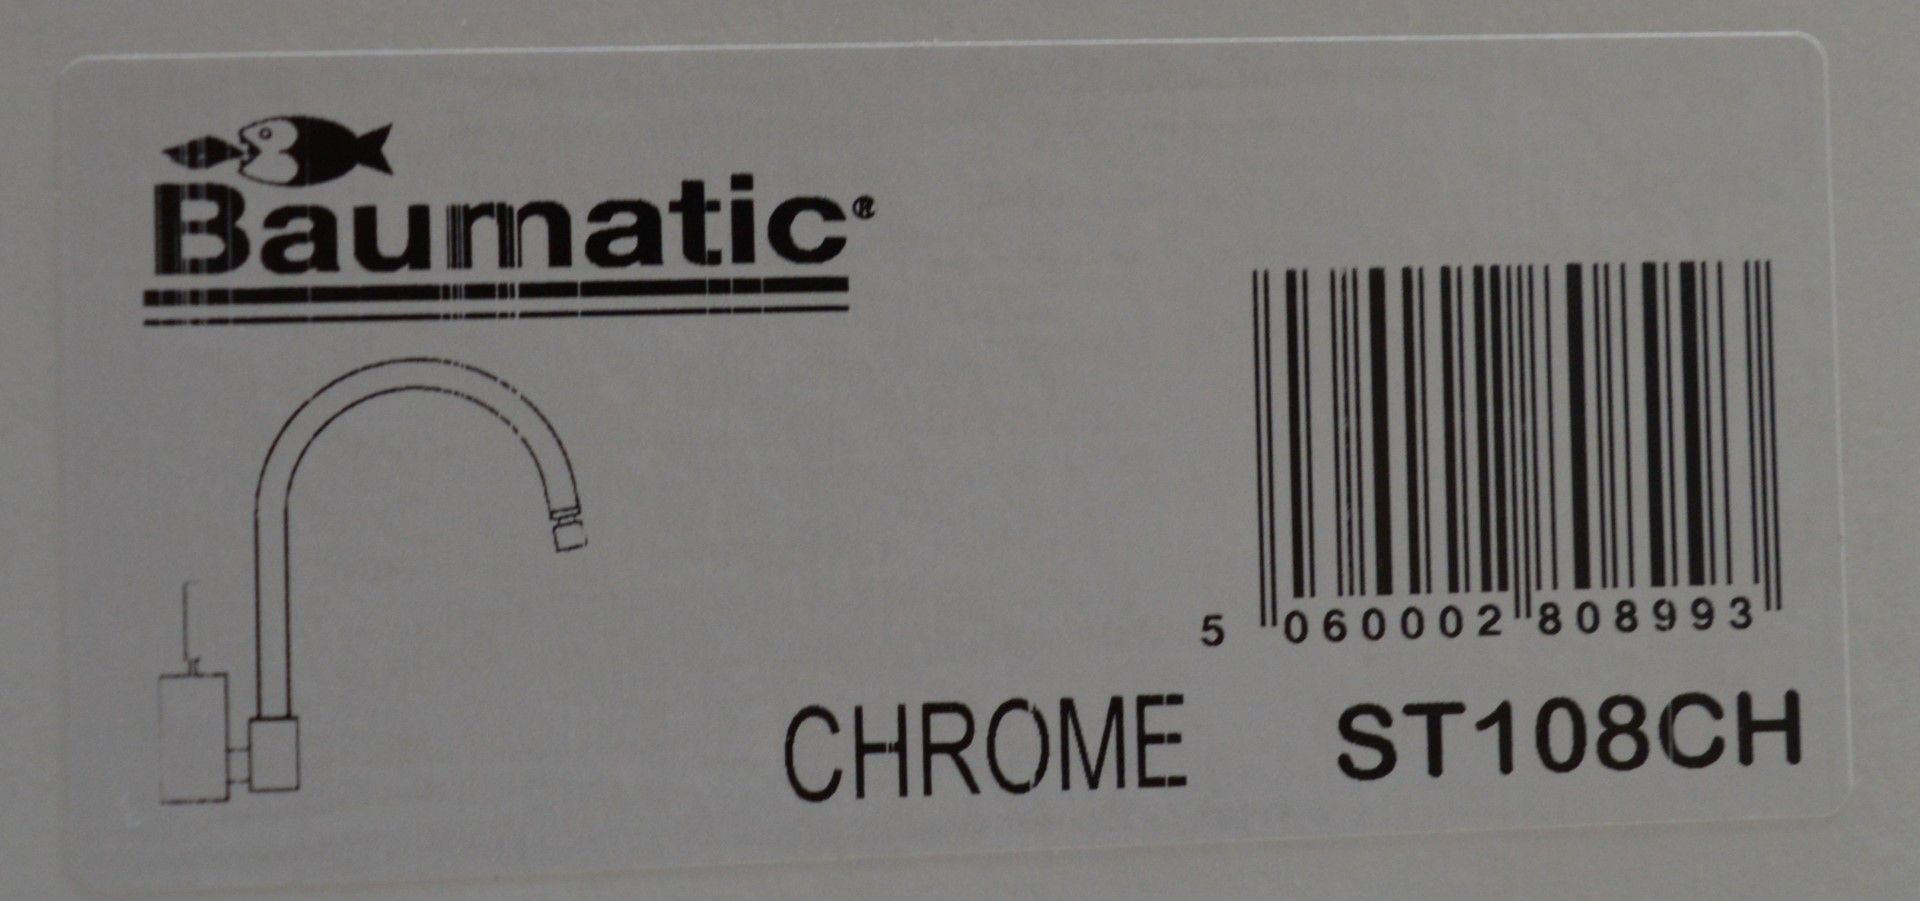 1 x Baumatic ST108CH Avalon Mixer Tap in Chrome – NEW & BOXED – CL053 – Location: Altrincham - Image 2 of 7